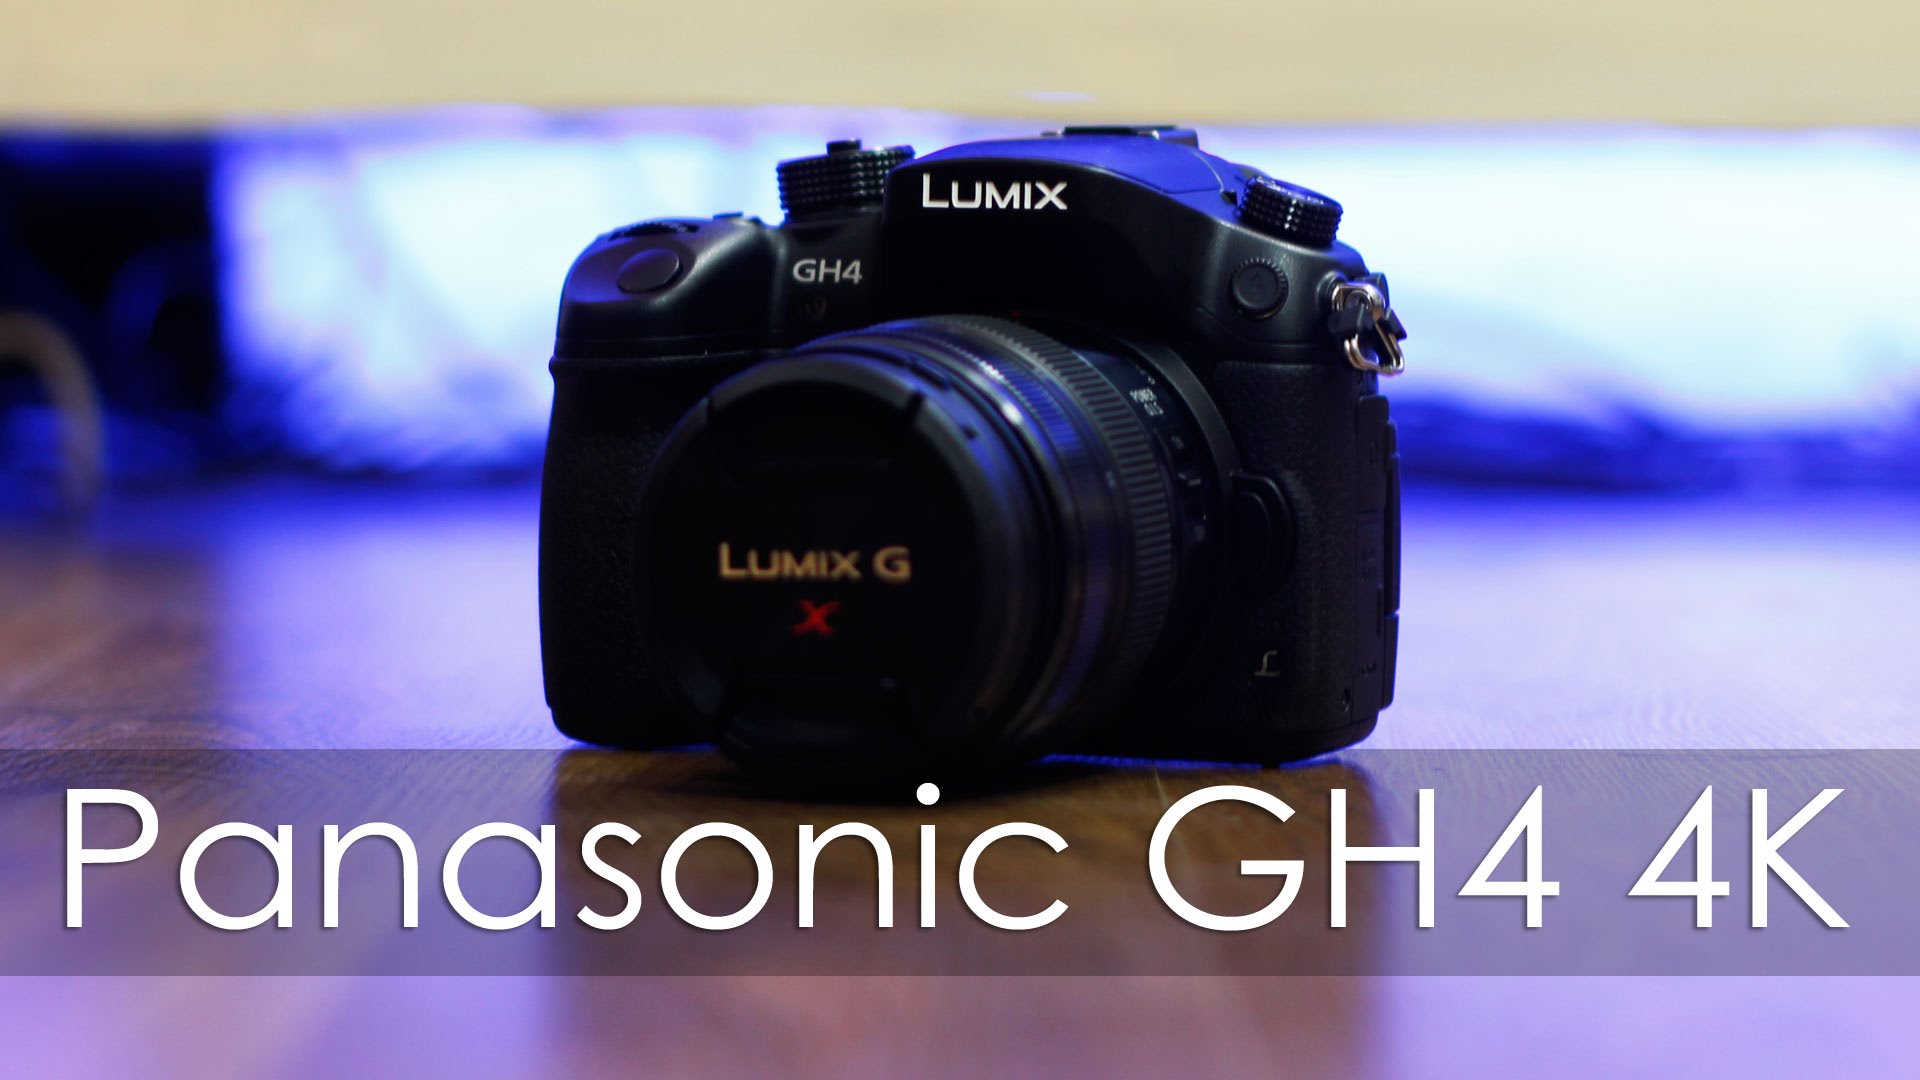 Panasonic GH4 4K Camera with Lumix 12-35mm f2.8 Lens Unboxing